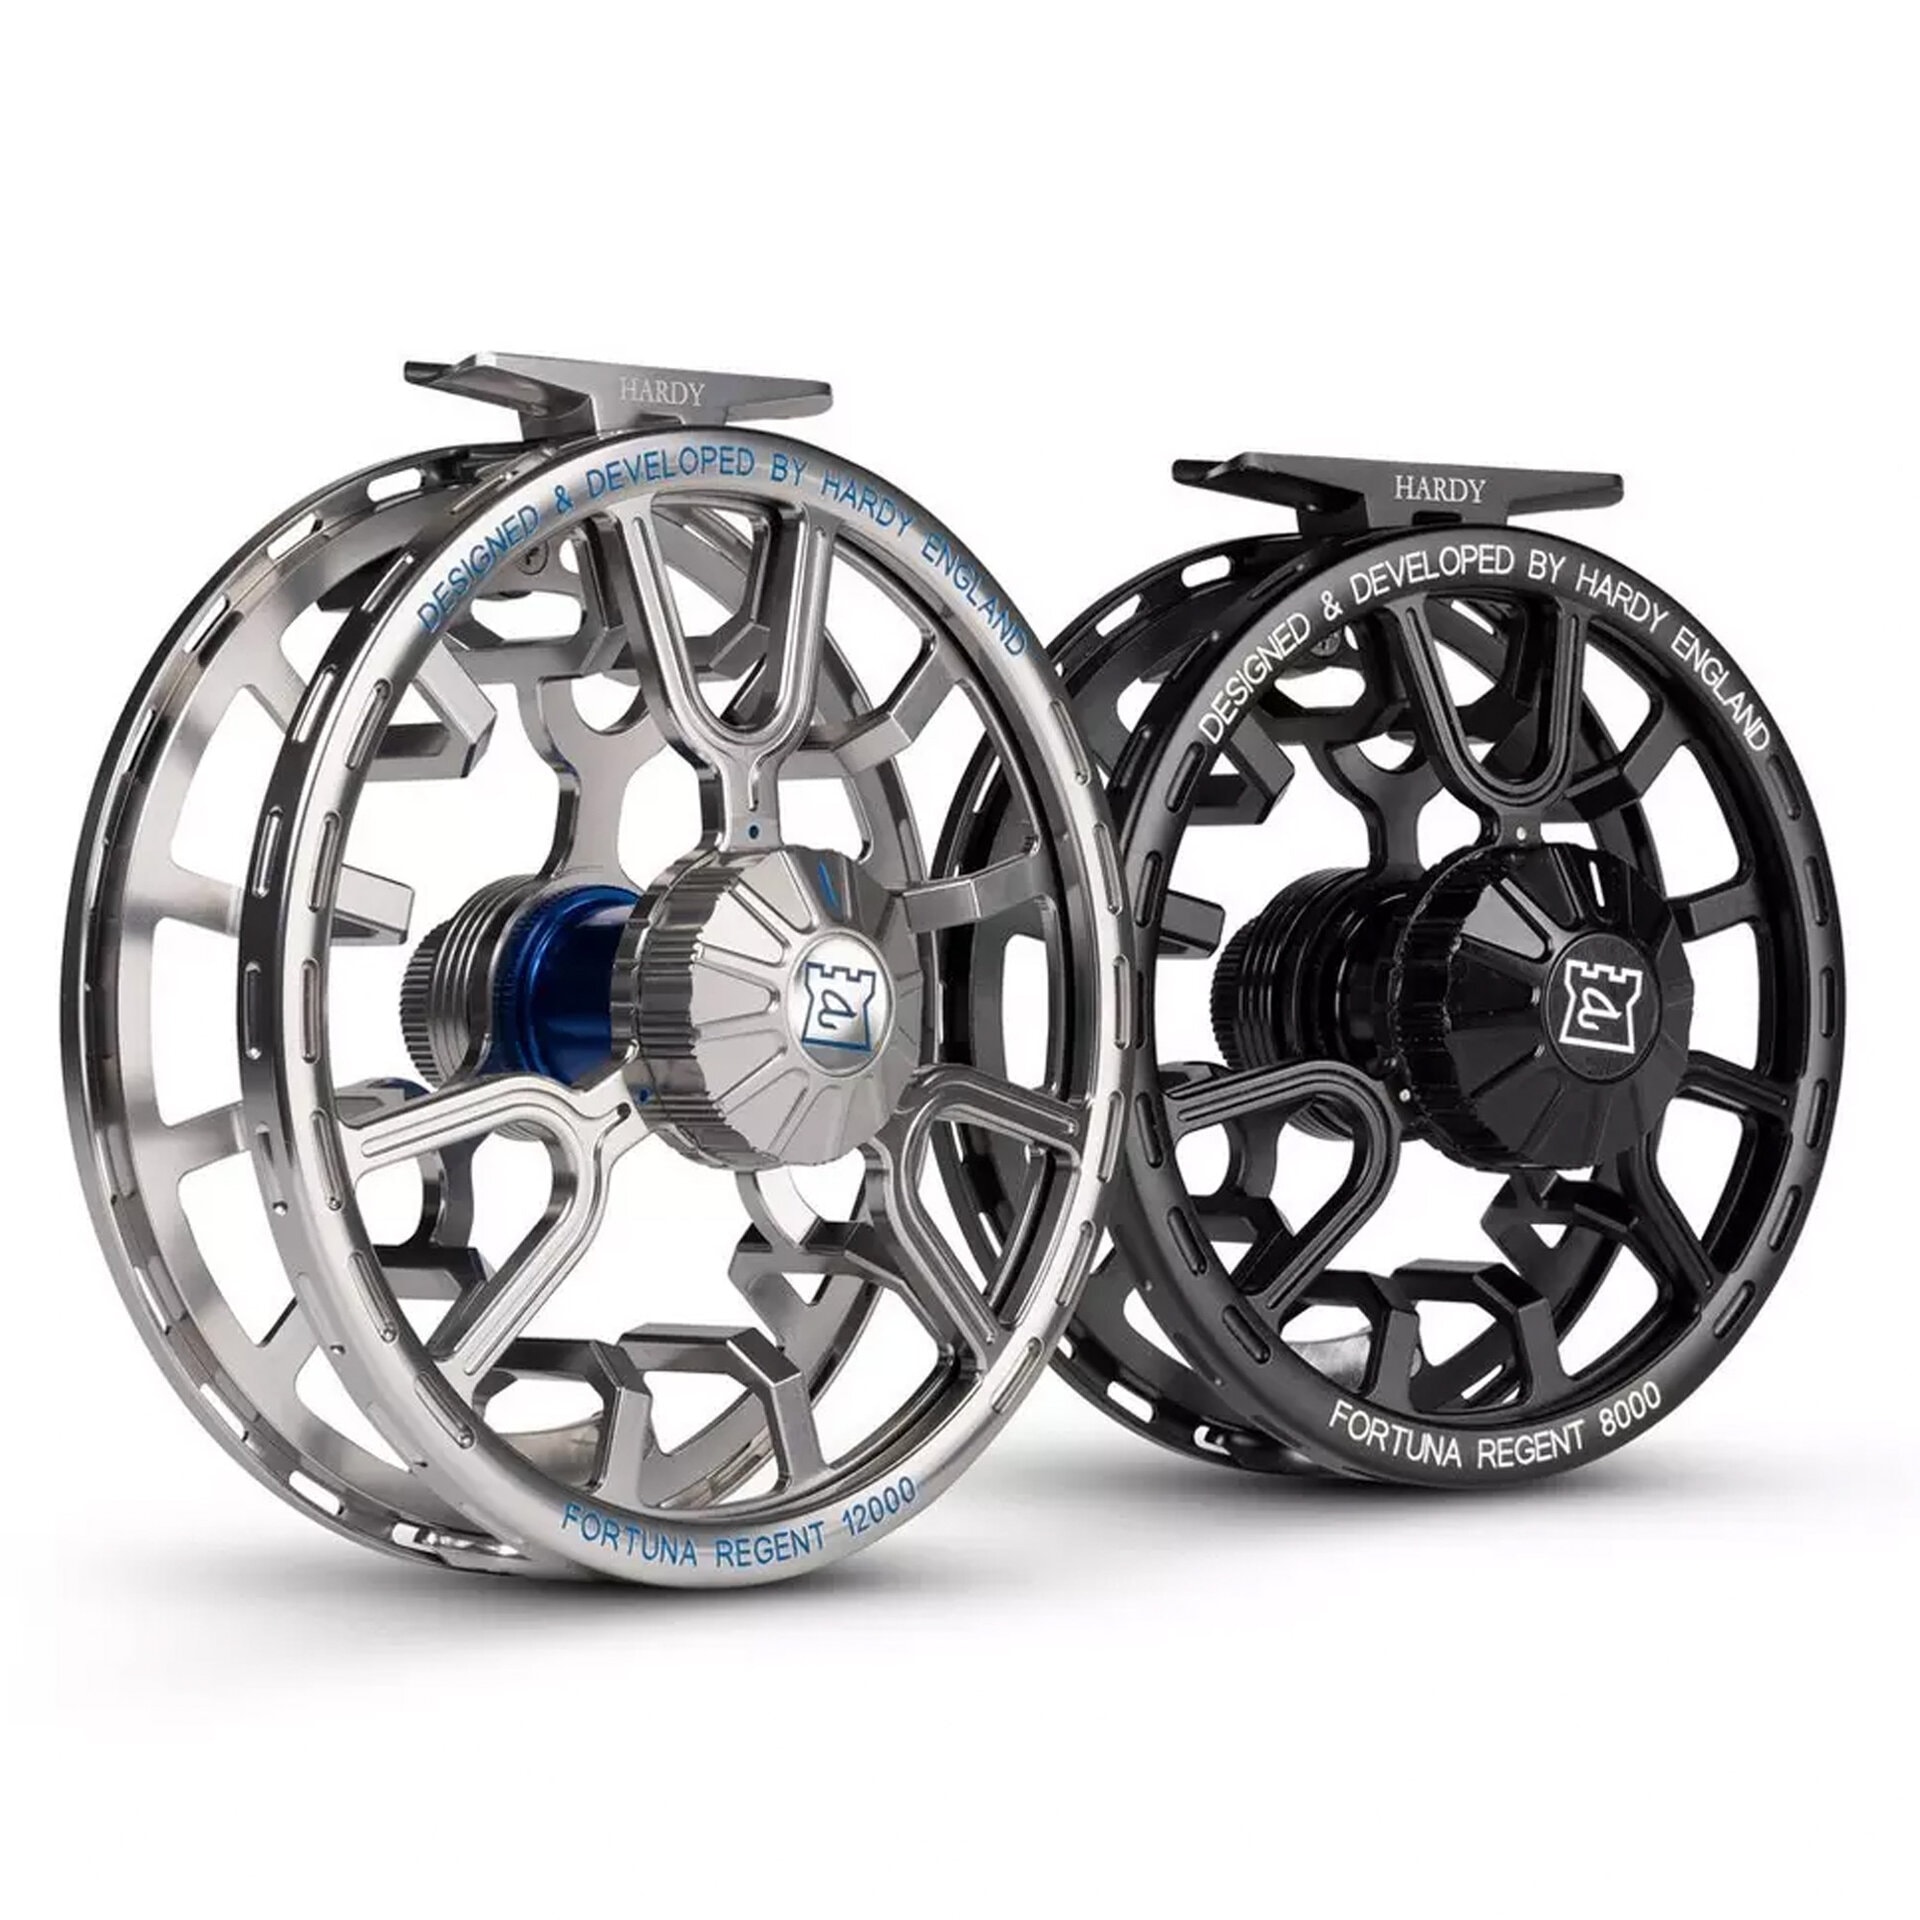 Fly Reels: High Performance Fly Fishing Reels